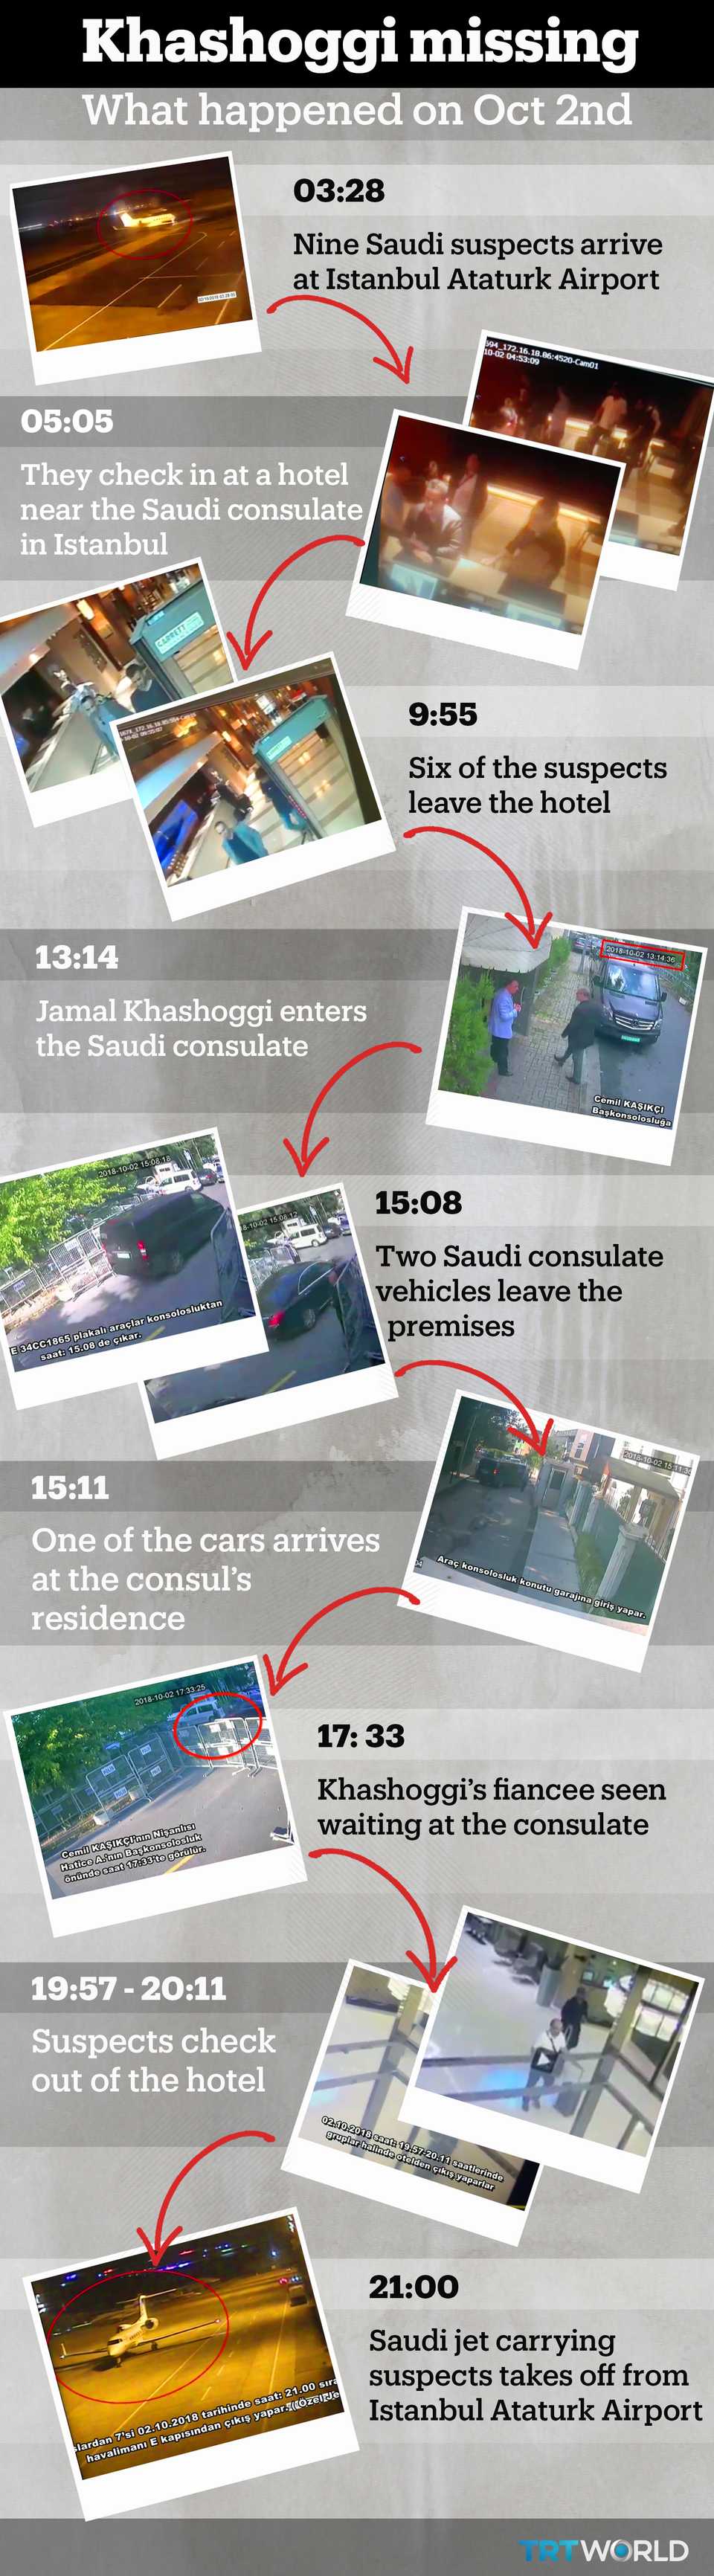 The events surrounding Jamal Khashoggi's disappearance on October 2 as gleaned from footage provided to TRT World.